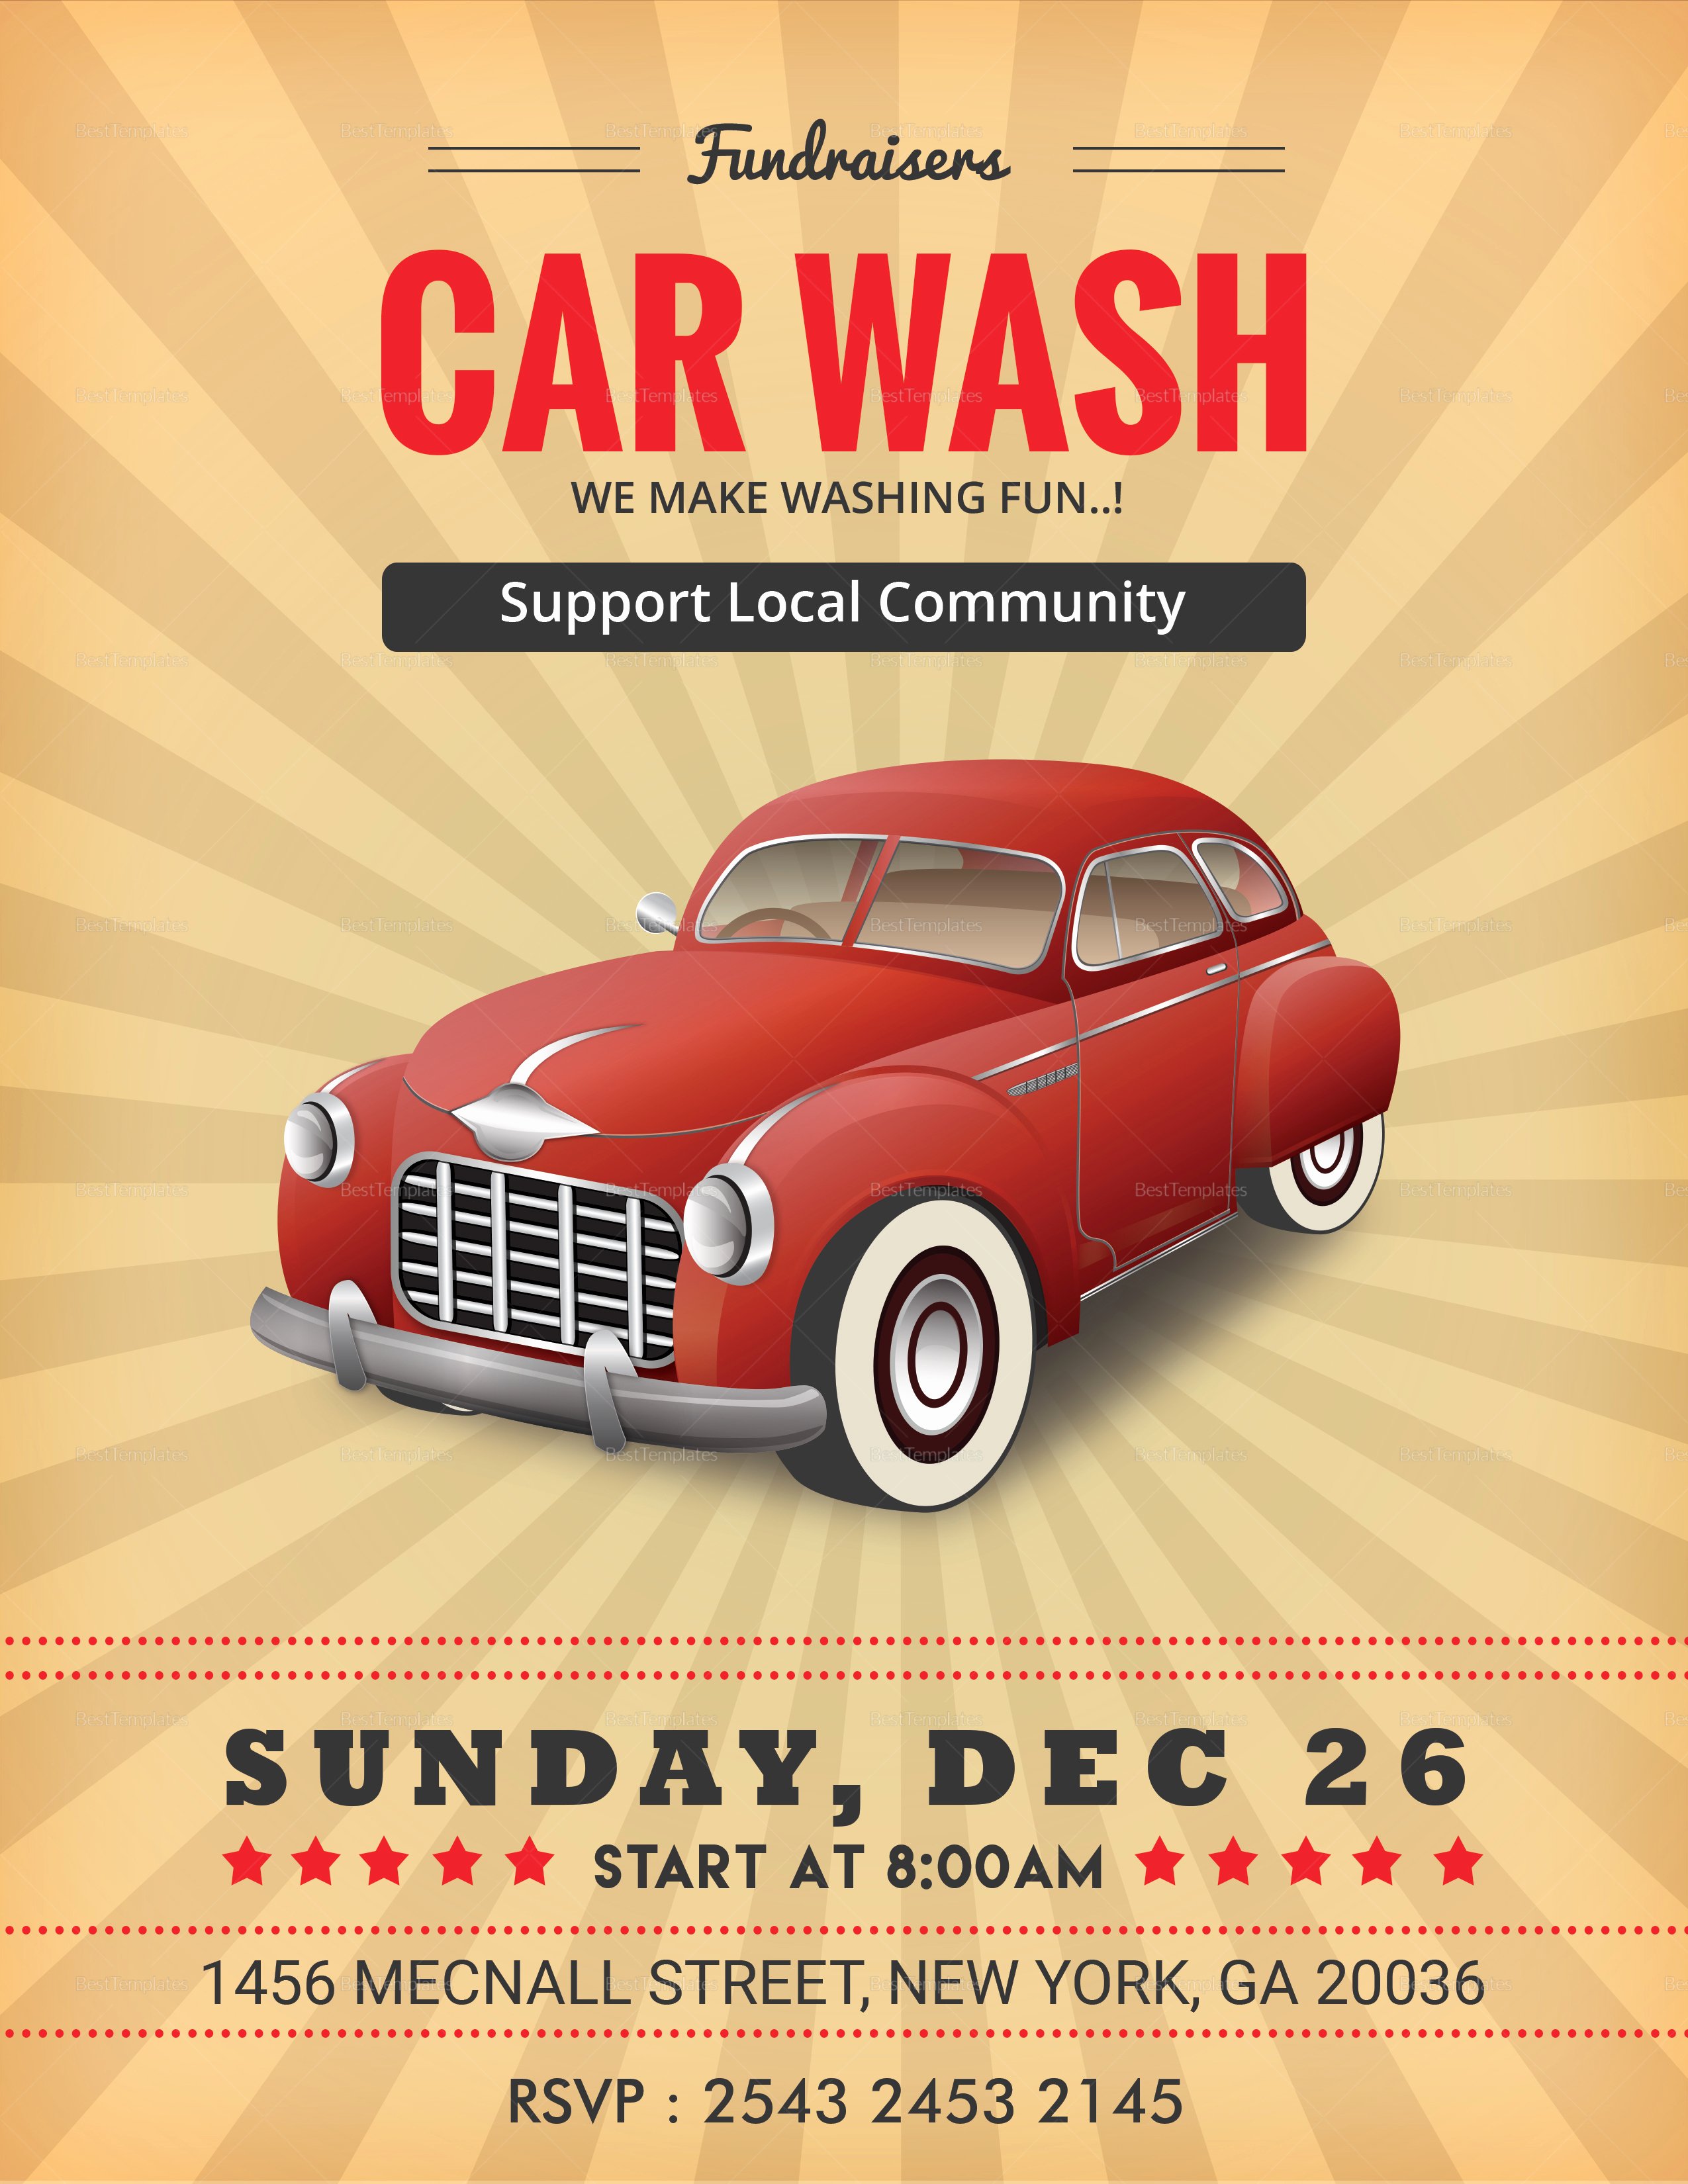 Car Wash Fundraiser Flyer Template Awesome Fundraiser Car Wash Flyer Design Template In Word Psd